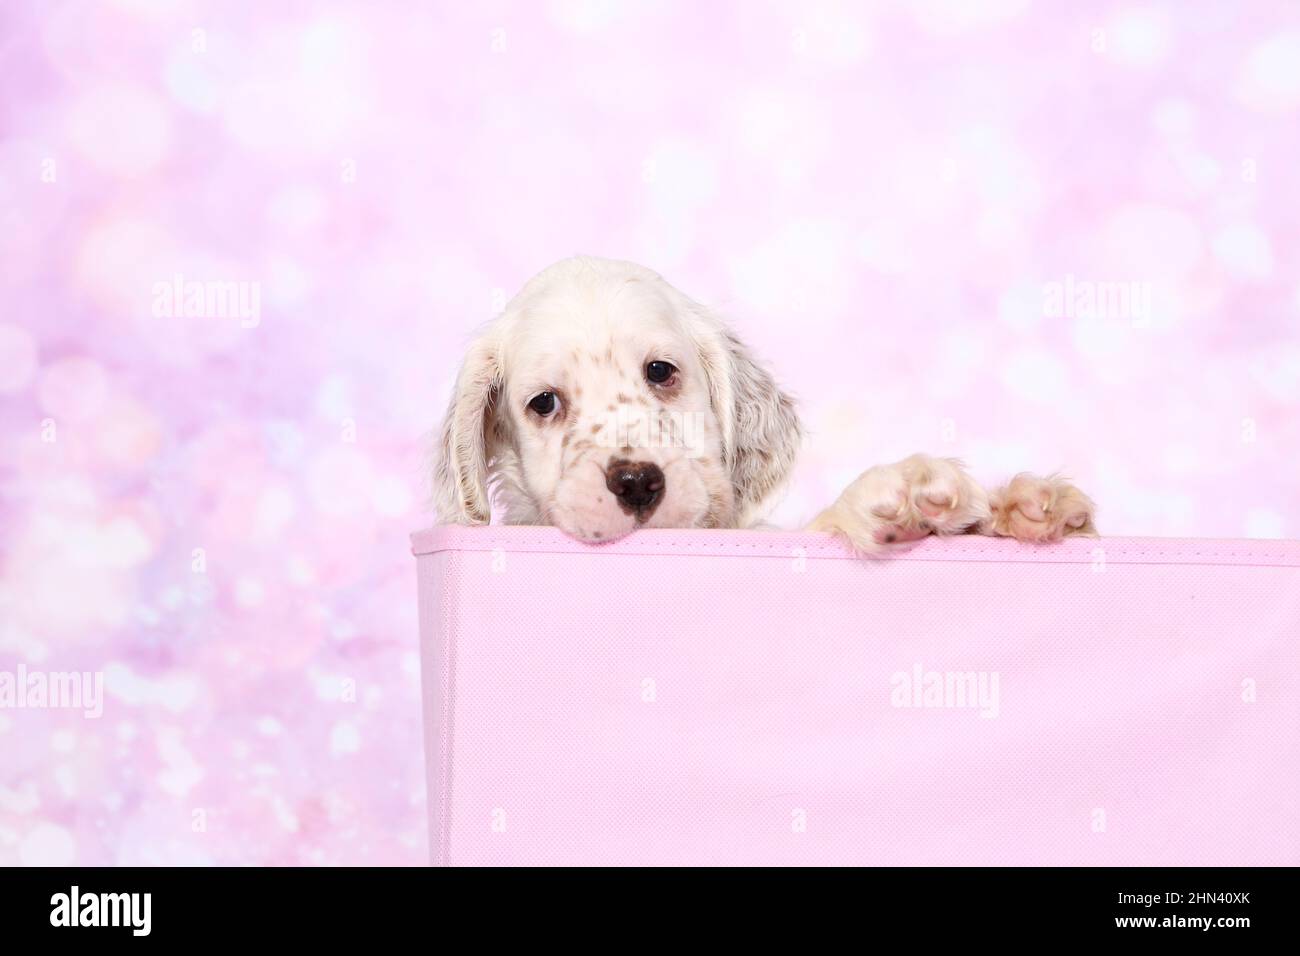 English Setter. Puppy in a bag, seen against a pink background. Germany Stock Photo